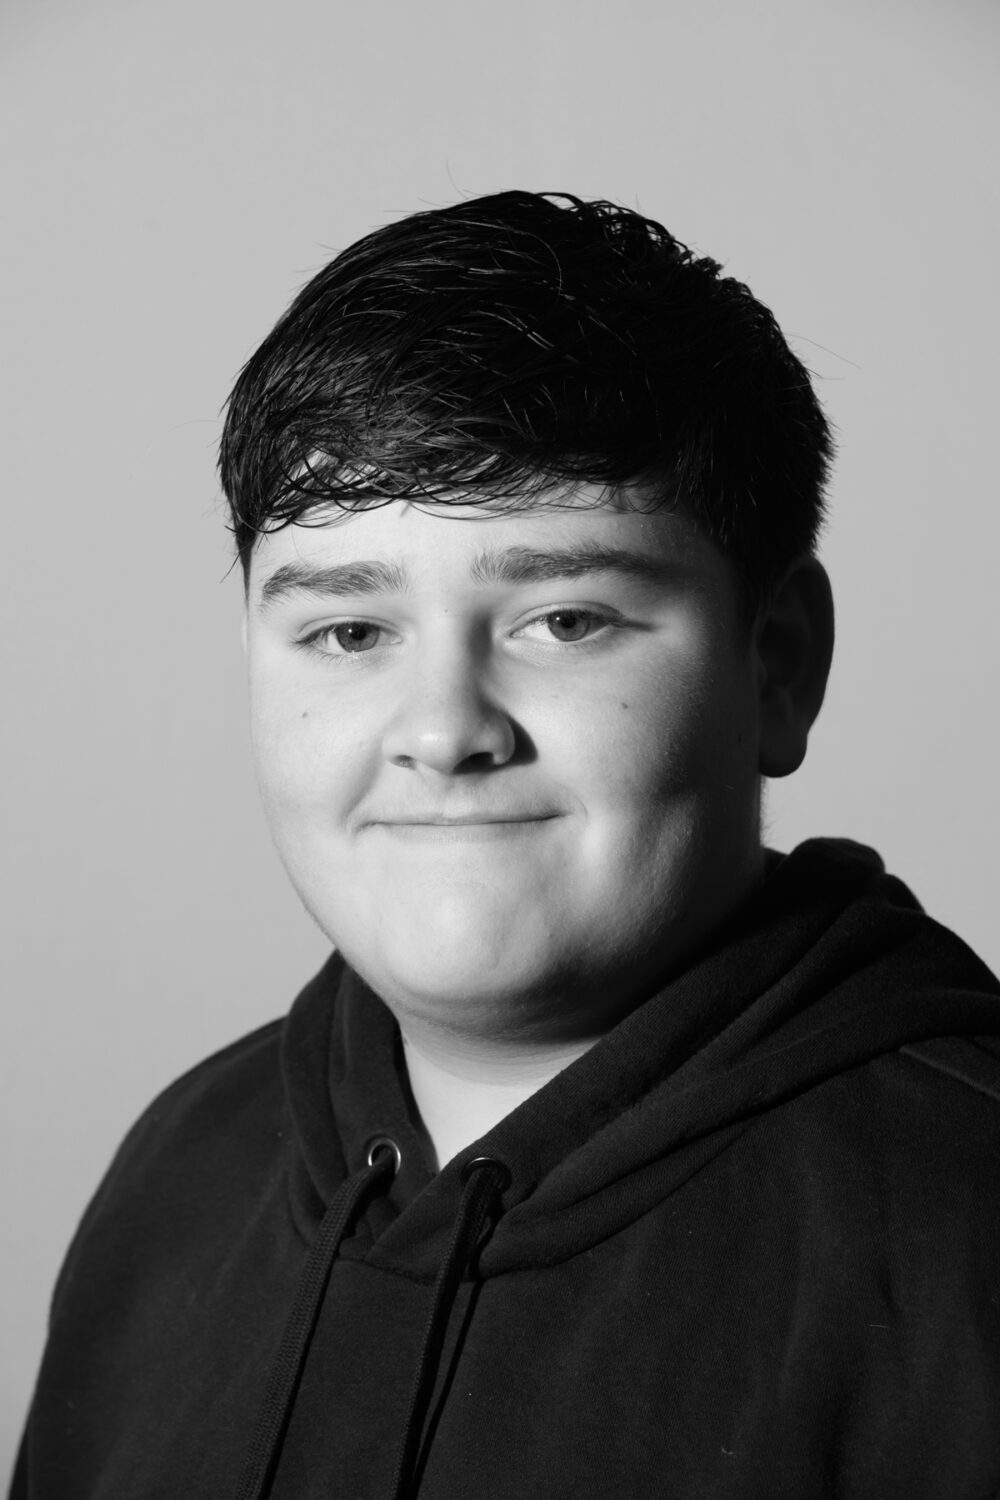 Luke Ritson plays James. He has been a member of TRY since he was 10. His most memorable performance to date was the role of Willy in Goodnight Mister Tom. He is looking forward to going into the sixth form in September.